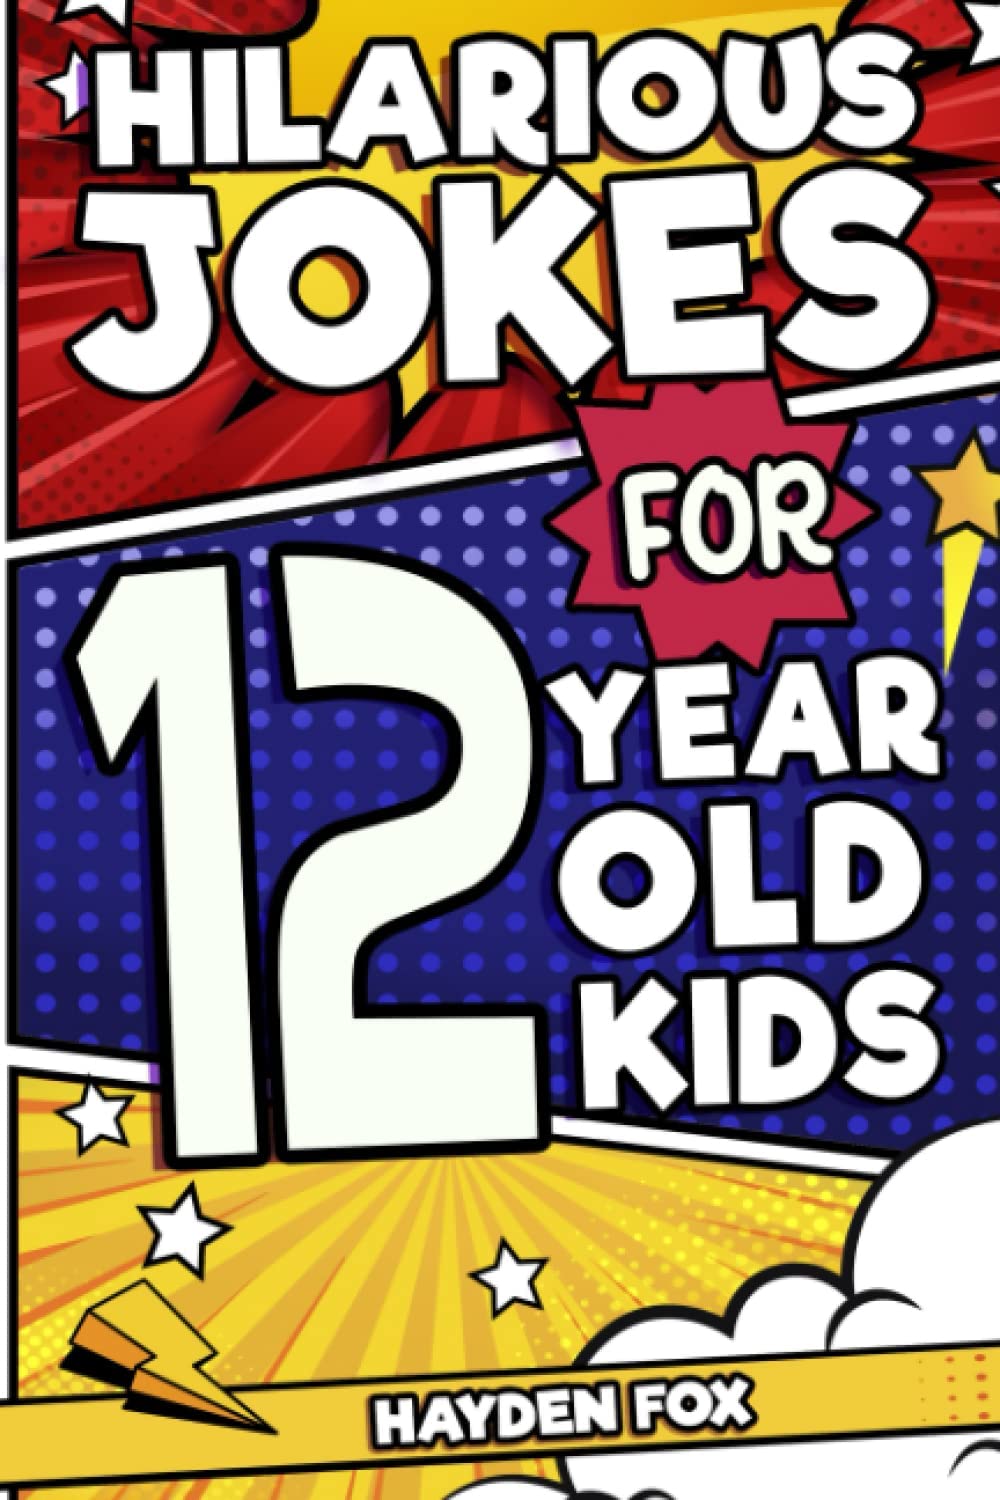 Hilarious Jokes For 12 Year Old Kids: An Awesome LOL Joke Book For Kids Ages 11-13 Filled With Tons of Tongue Twisters, Rib Ticklers, Side Splitters and Knock Knocks